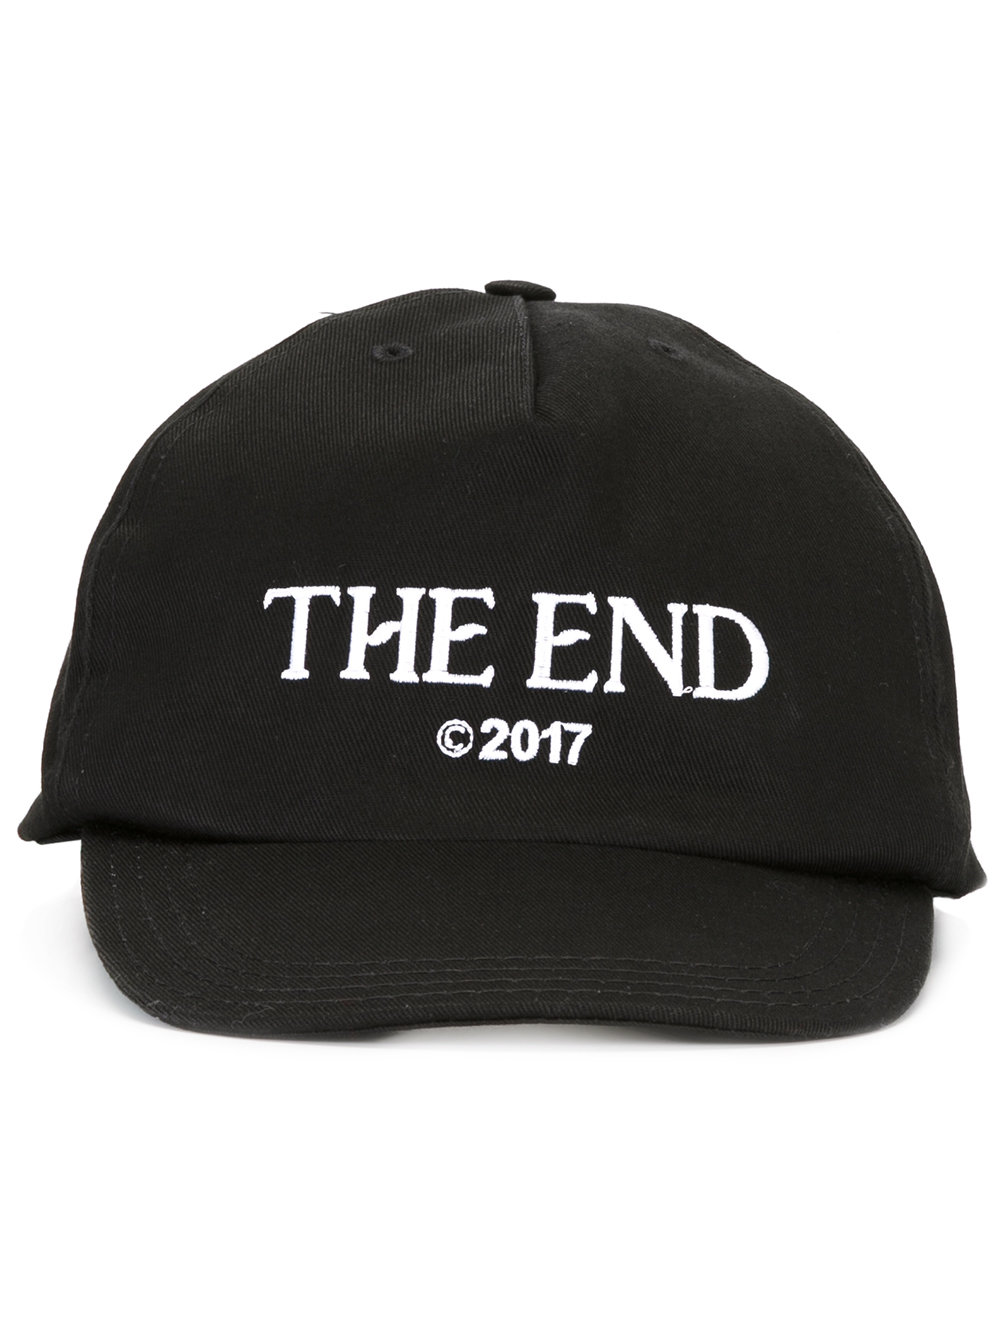 Off-White 'the end' embroidery cap BLACK Men Accessories Hats